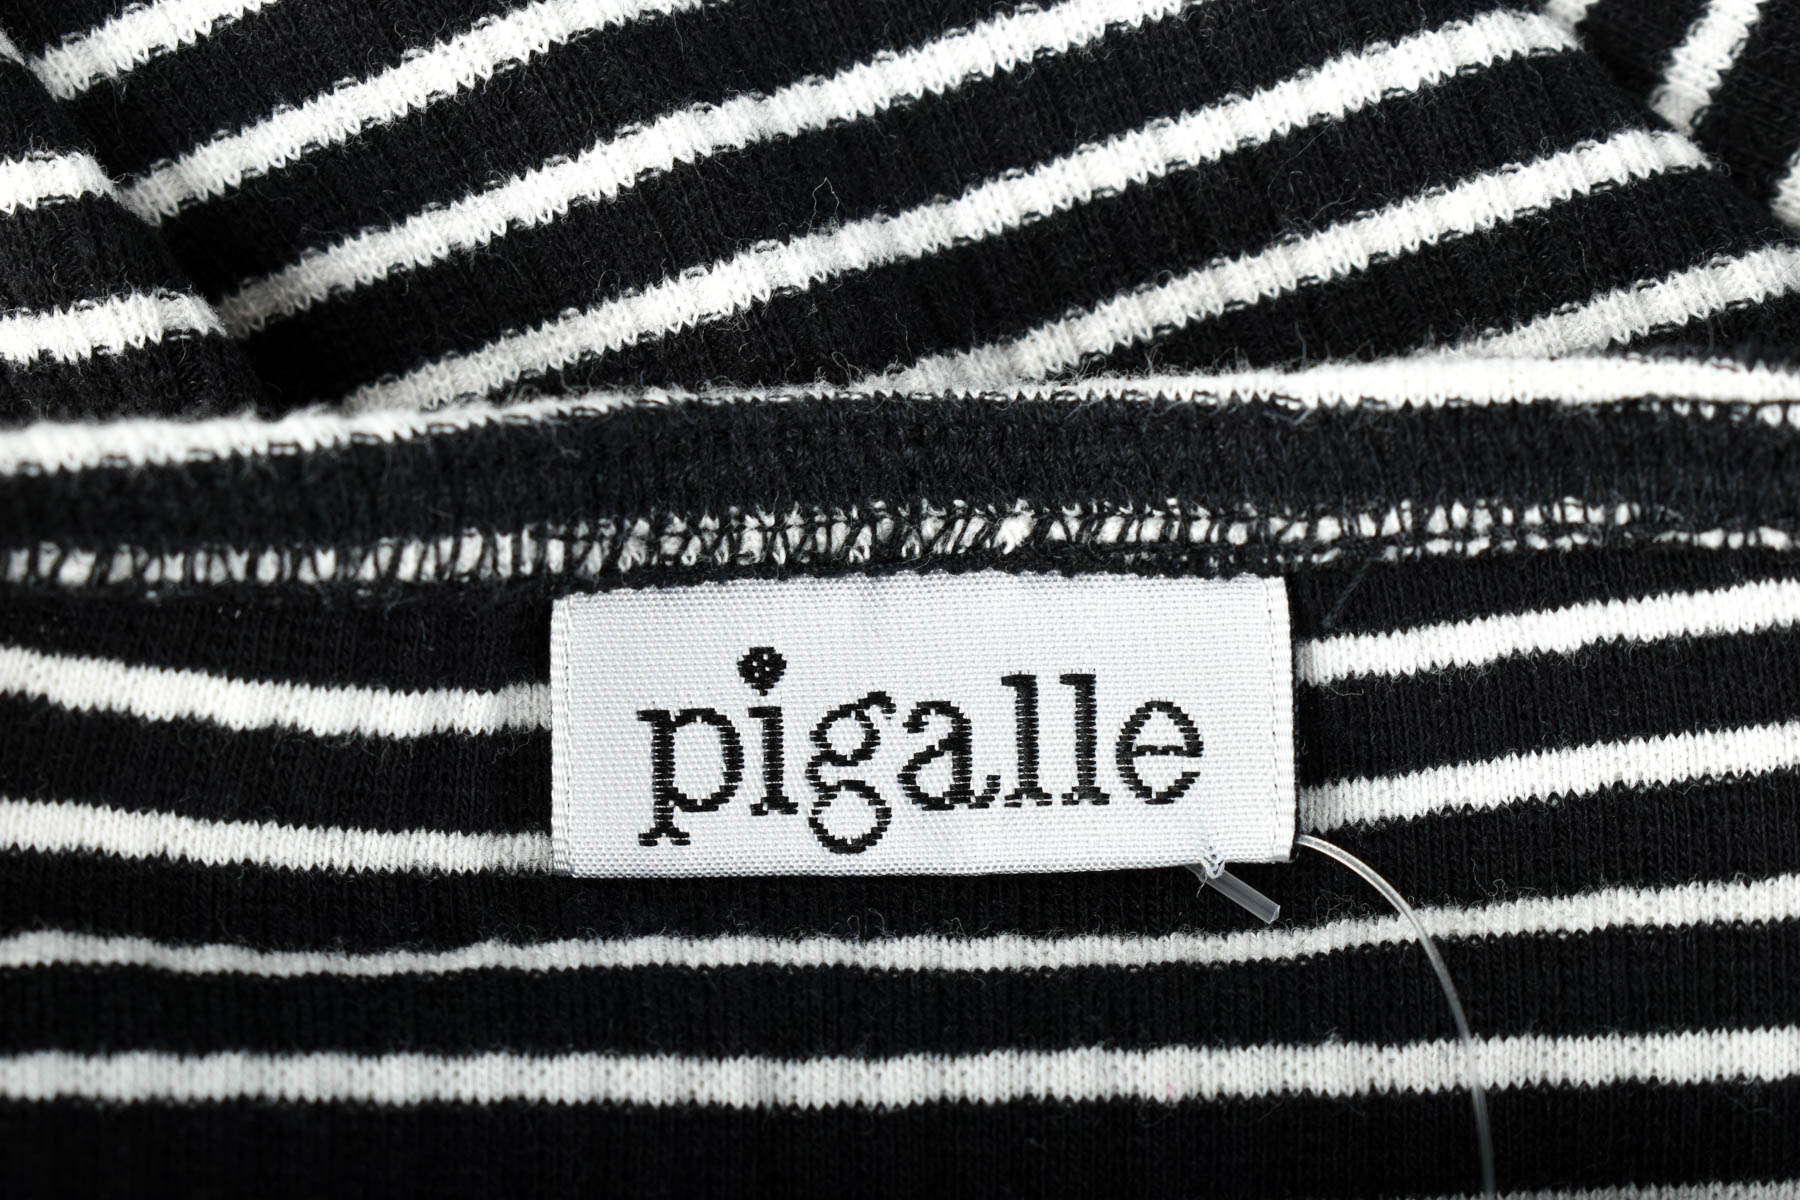 Women's sweater - PIGALLE - 2